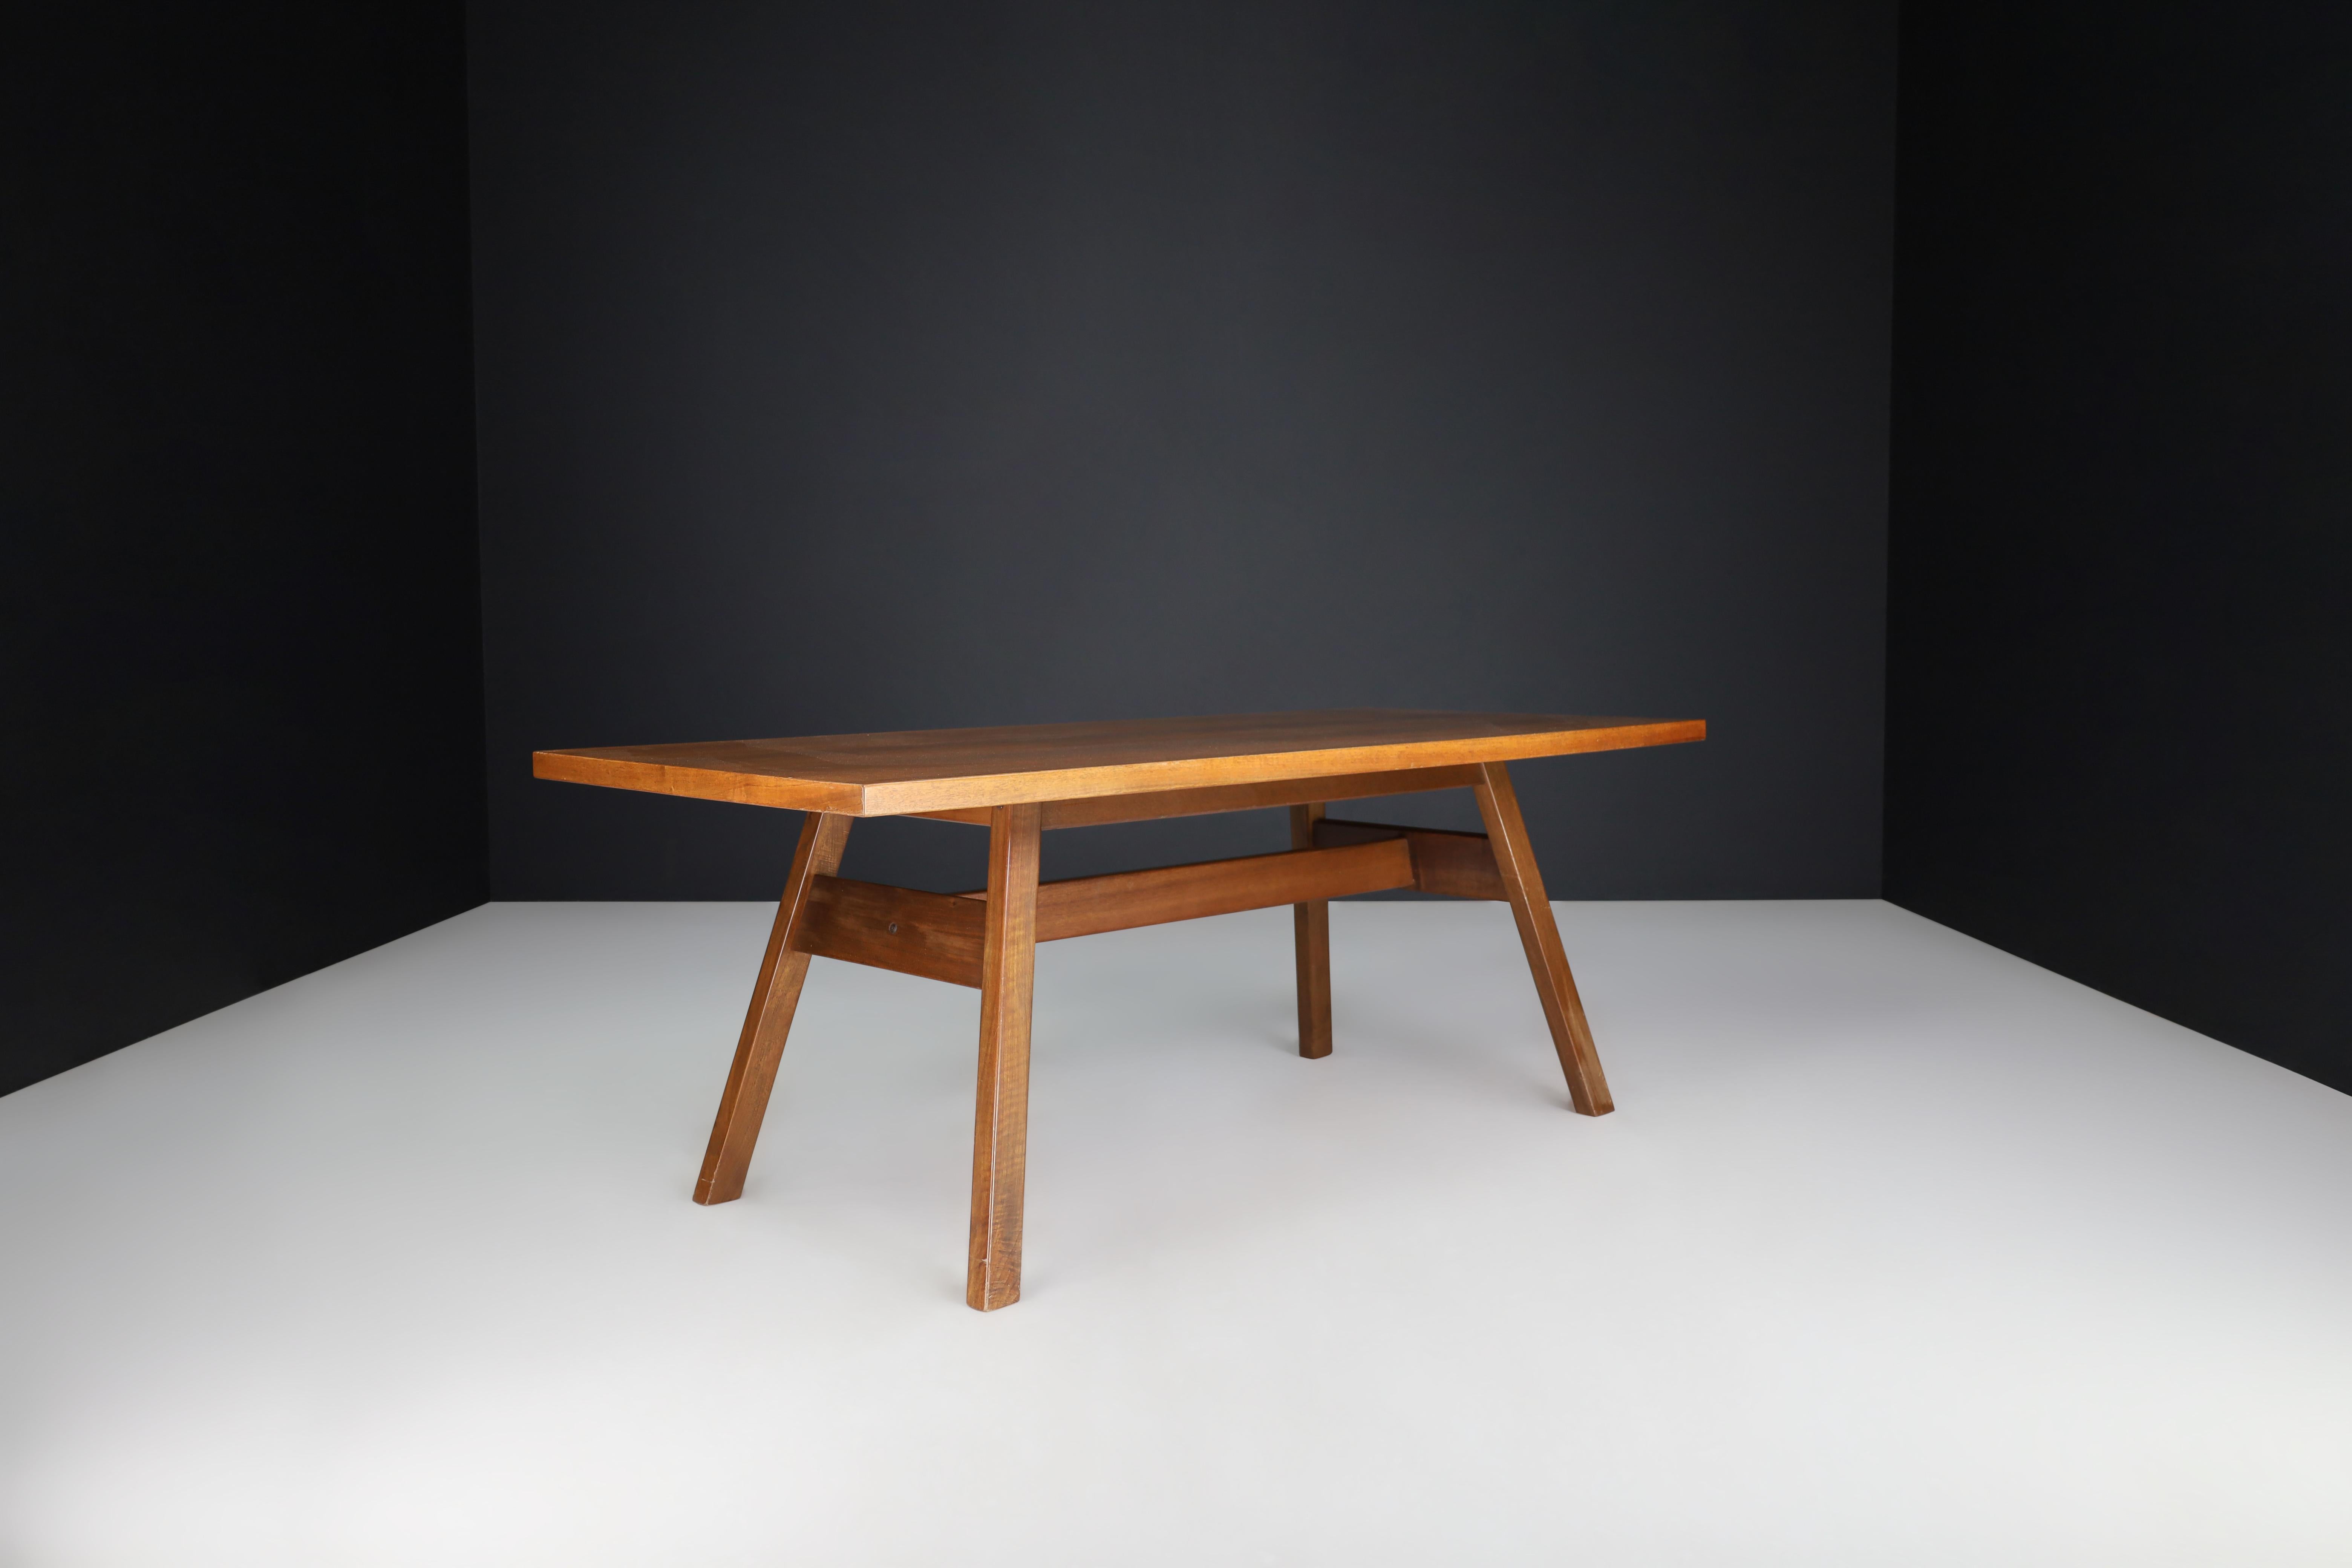 20th Century Giovanni Michelucci Walnut Dining Room Table for Poltronova, Italy, 1964 For Sale